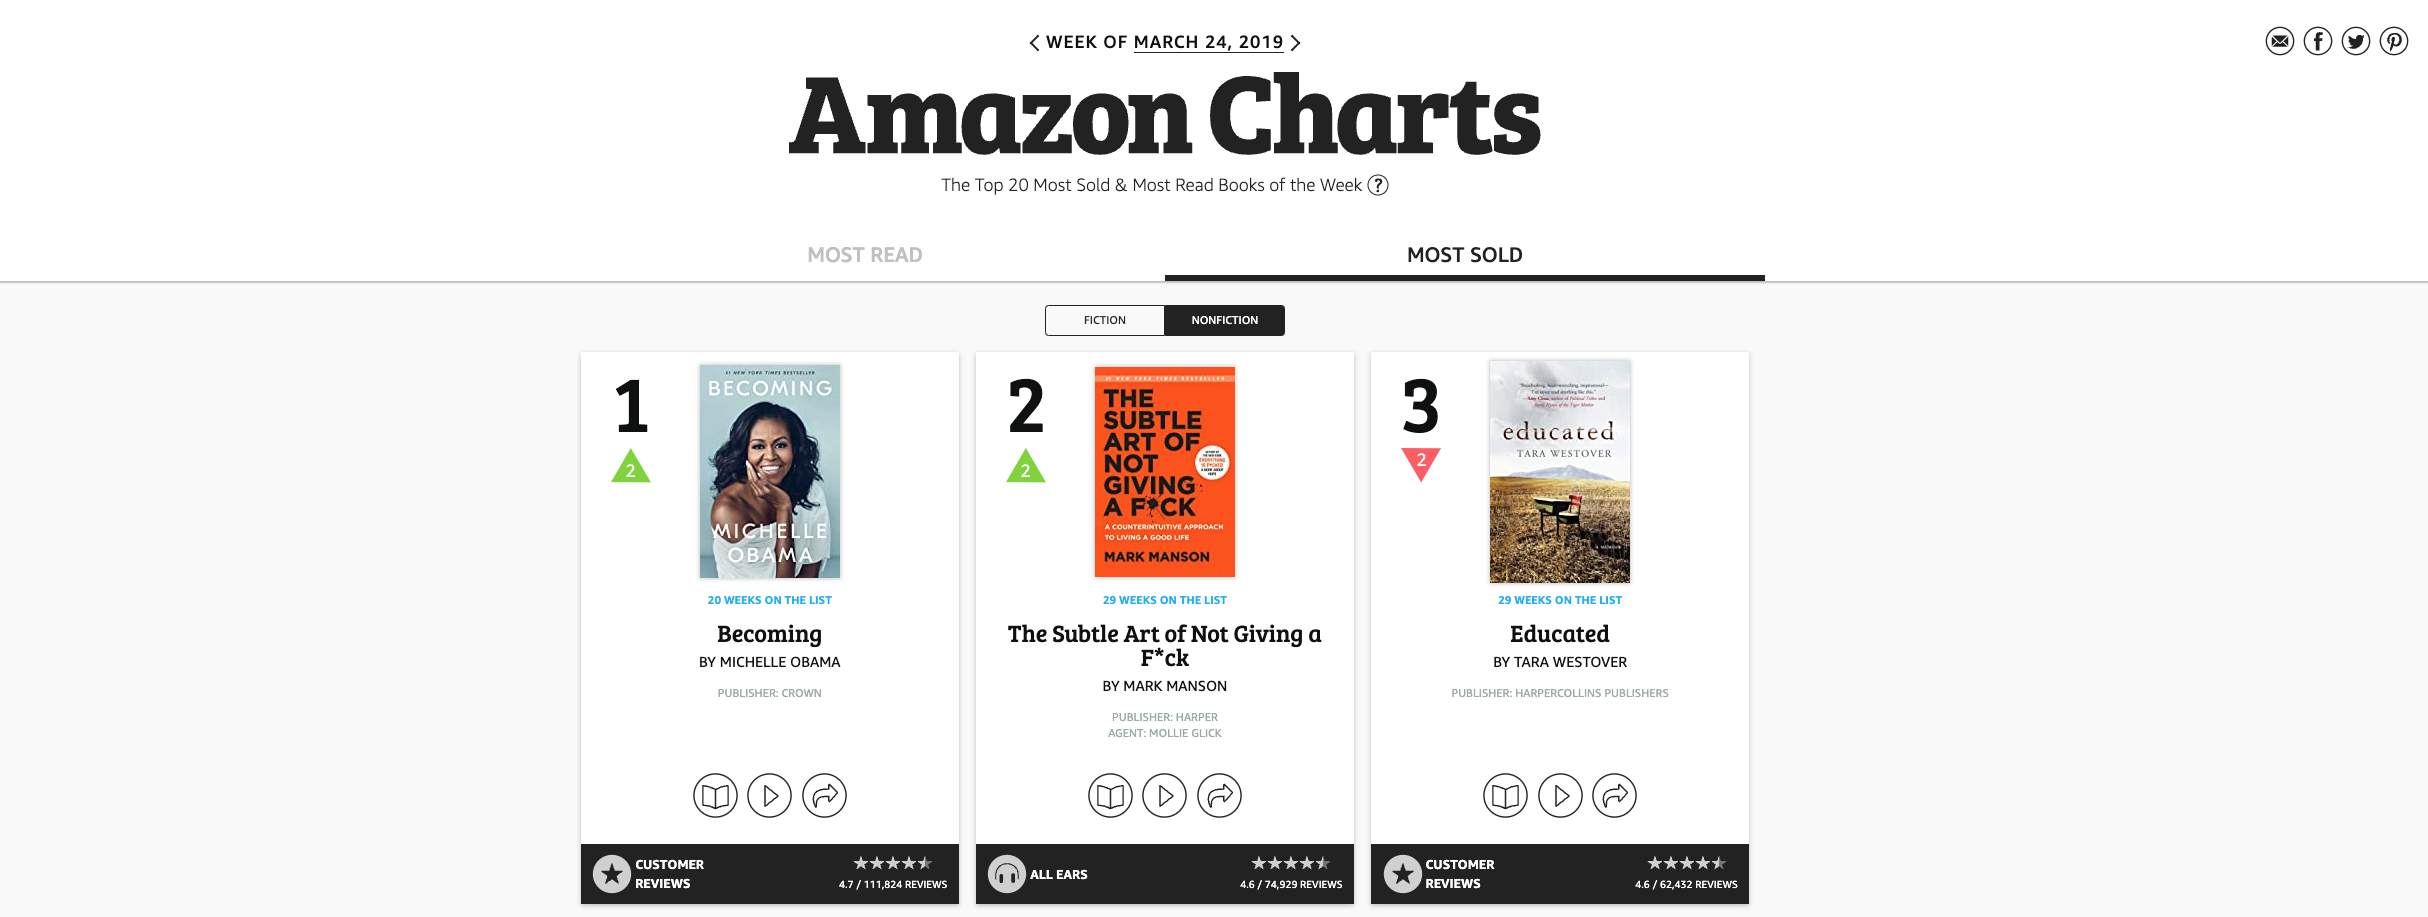 Amazon's Most Sold and Most Read Charts